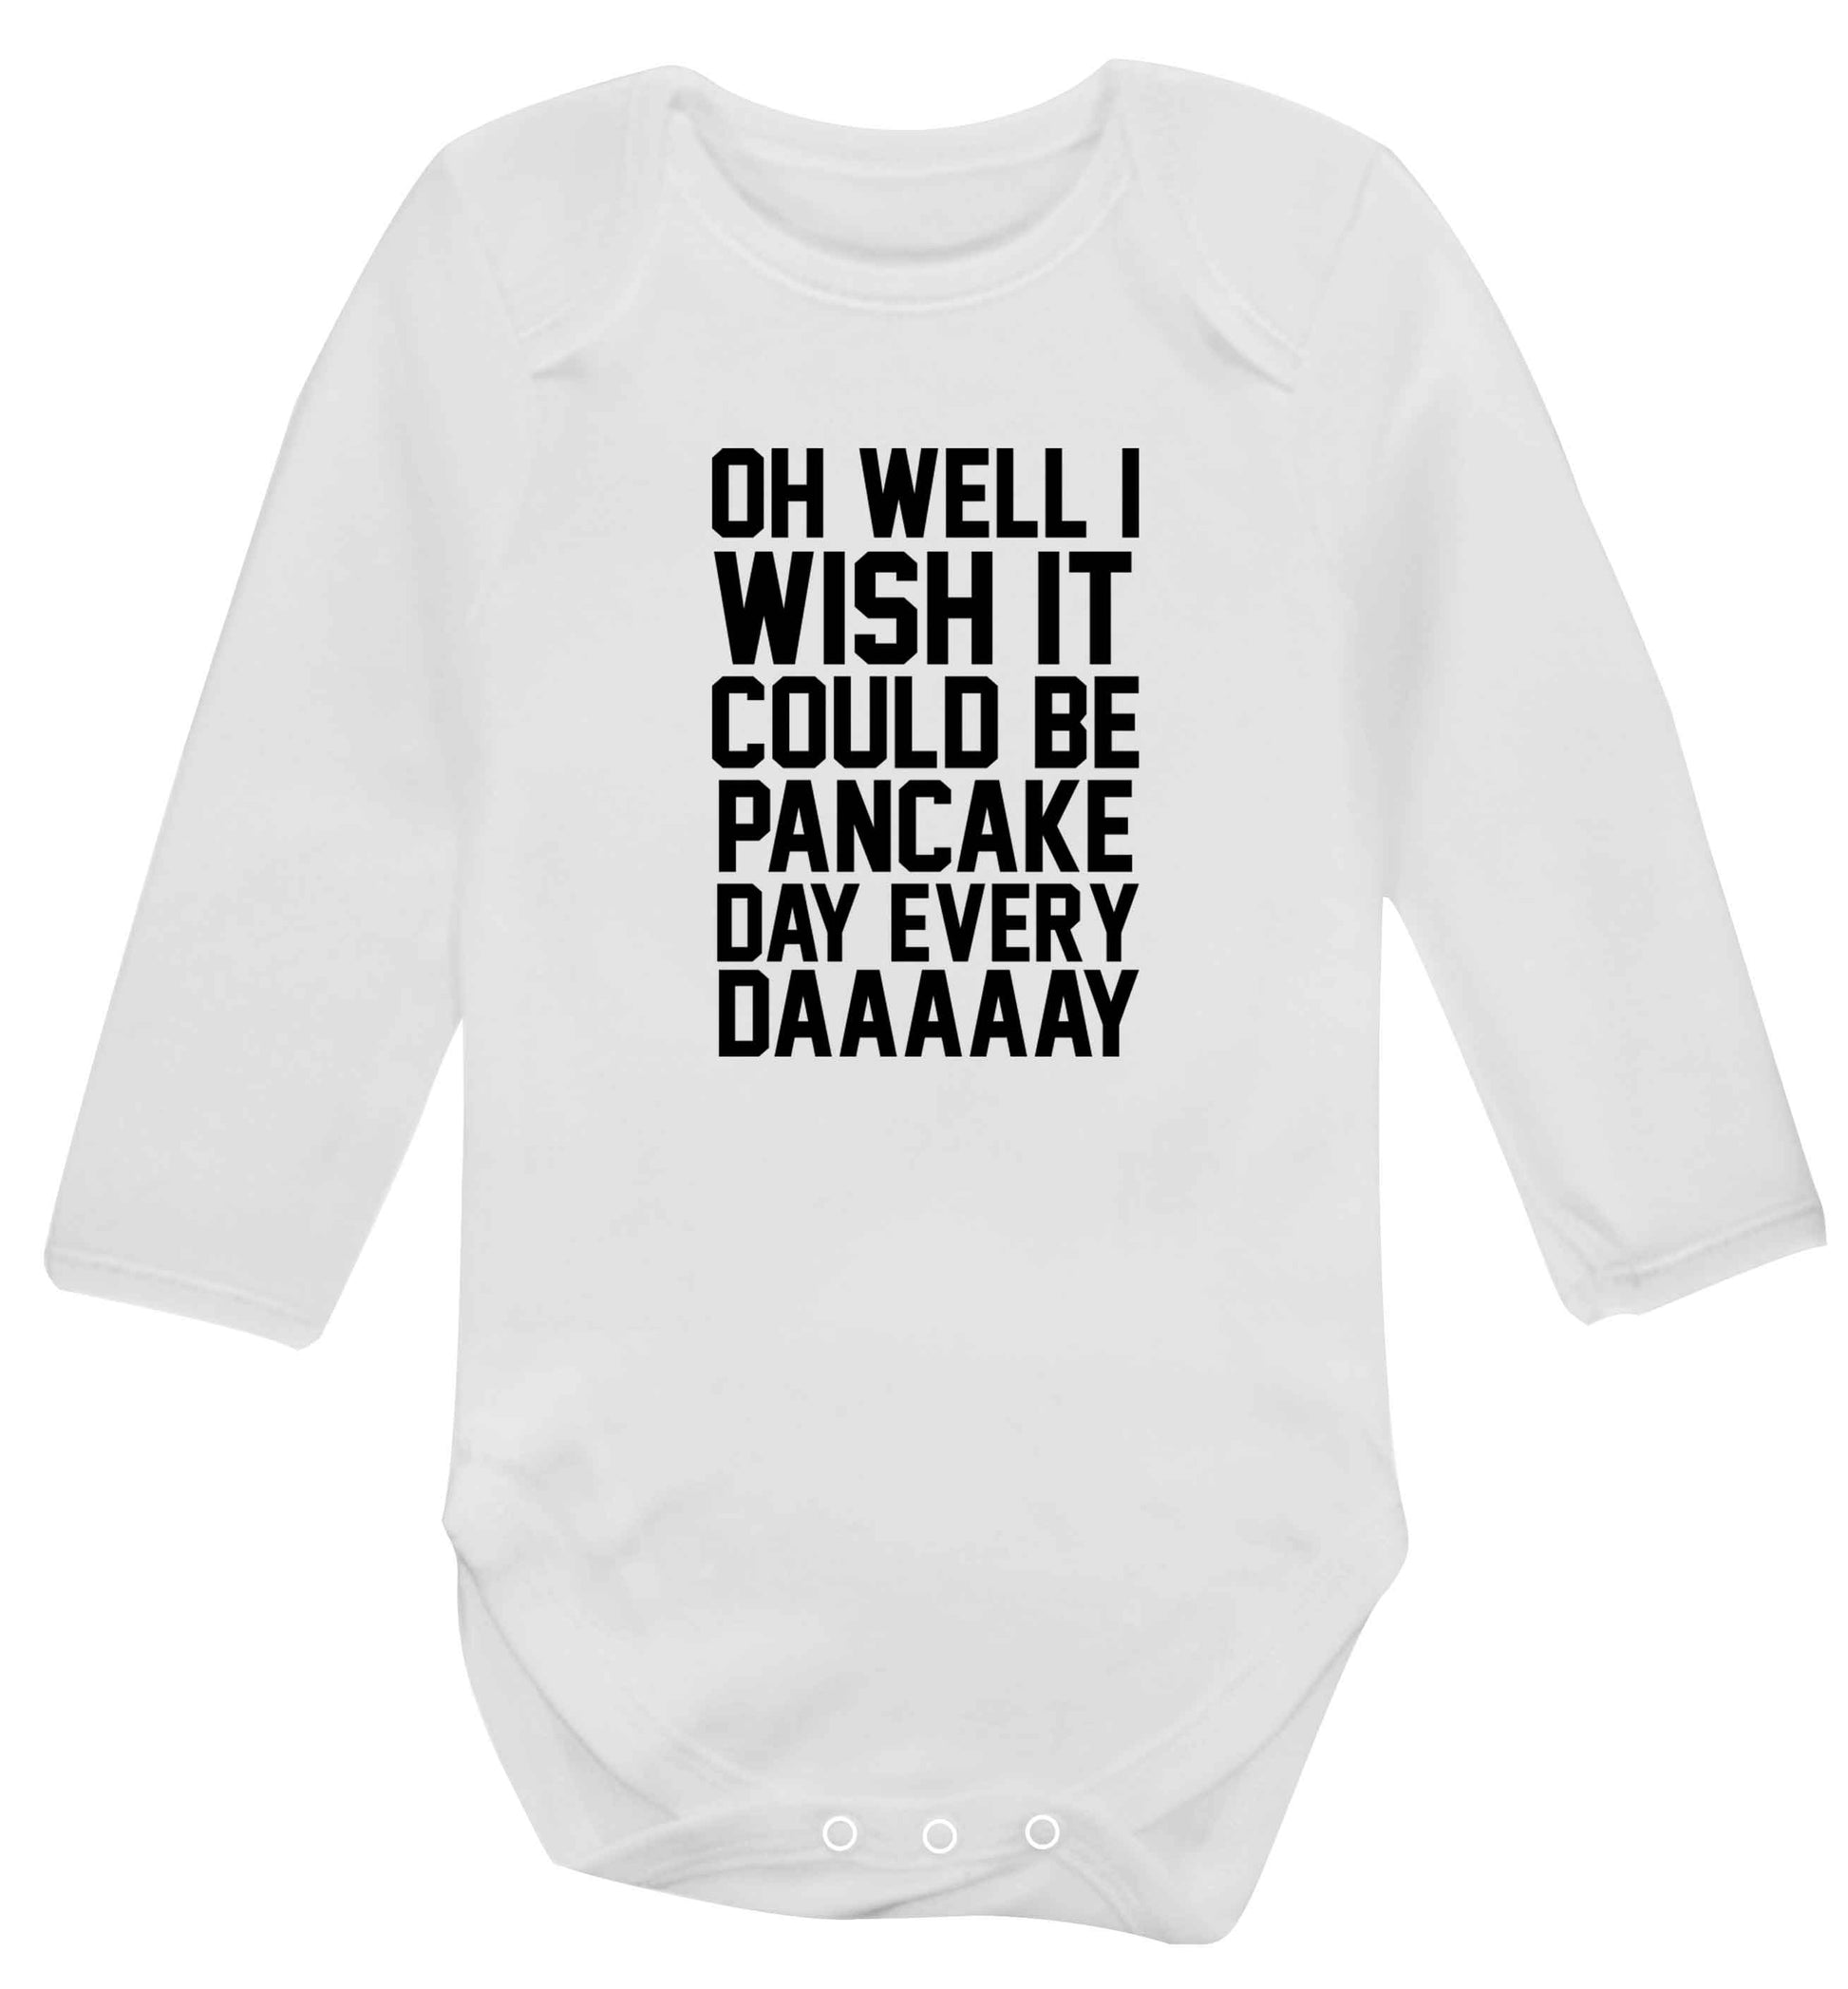 Oh well I wish it could be pancake day every day baby vest long sleeved white 6-12 months